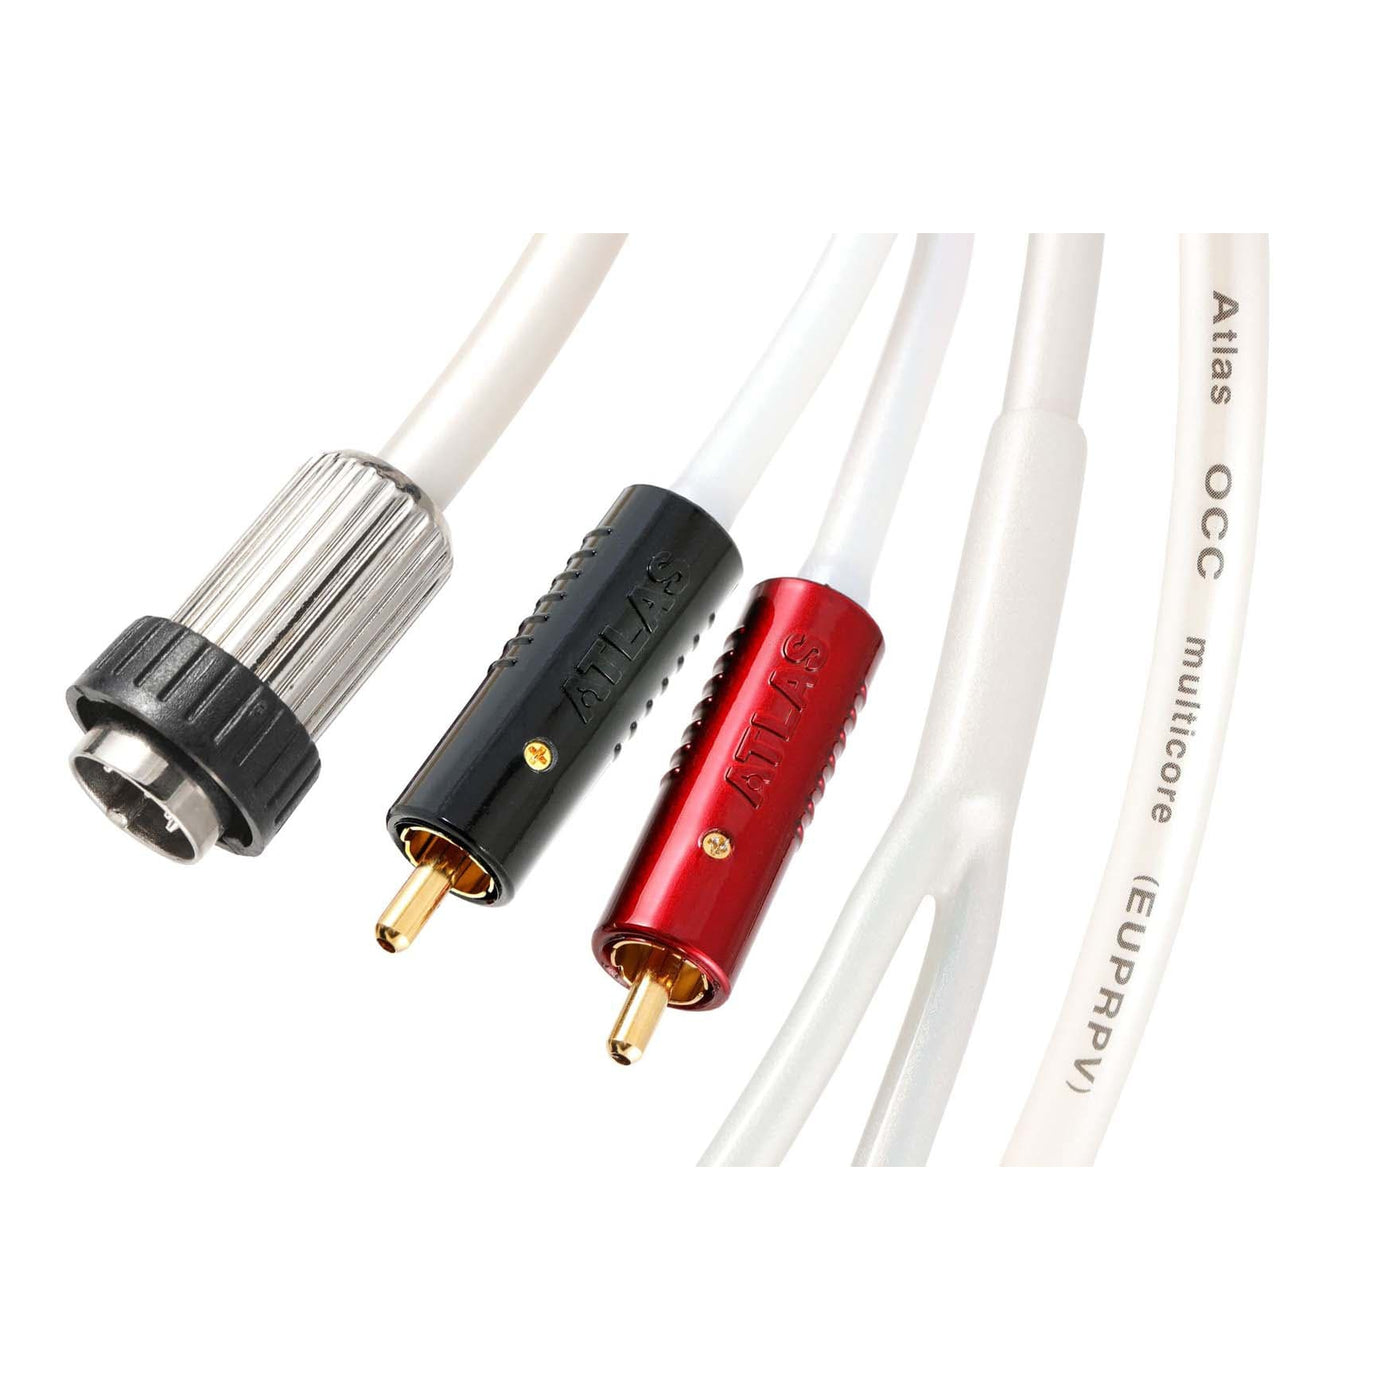 Atlas Equator DIN–Achromatic RCA Cable at Audio Influence